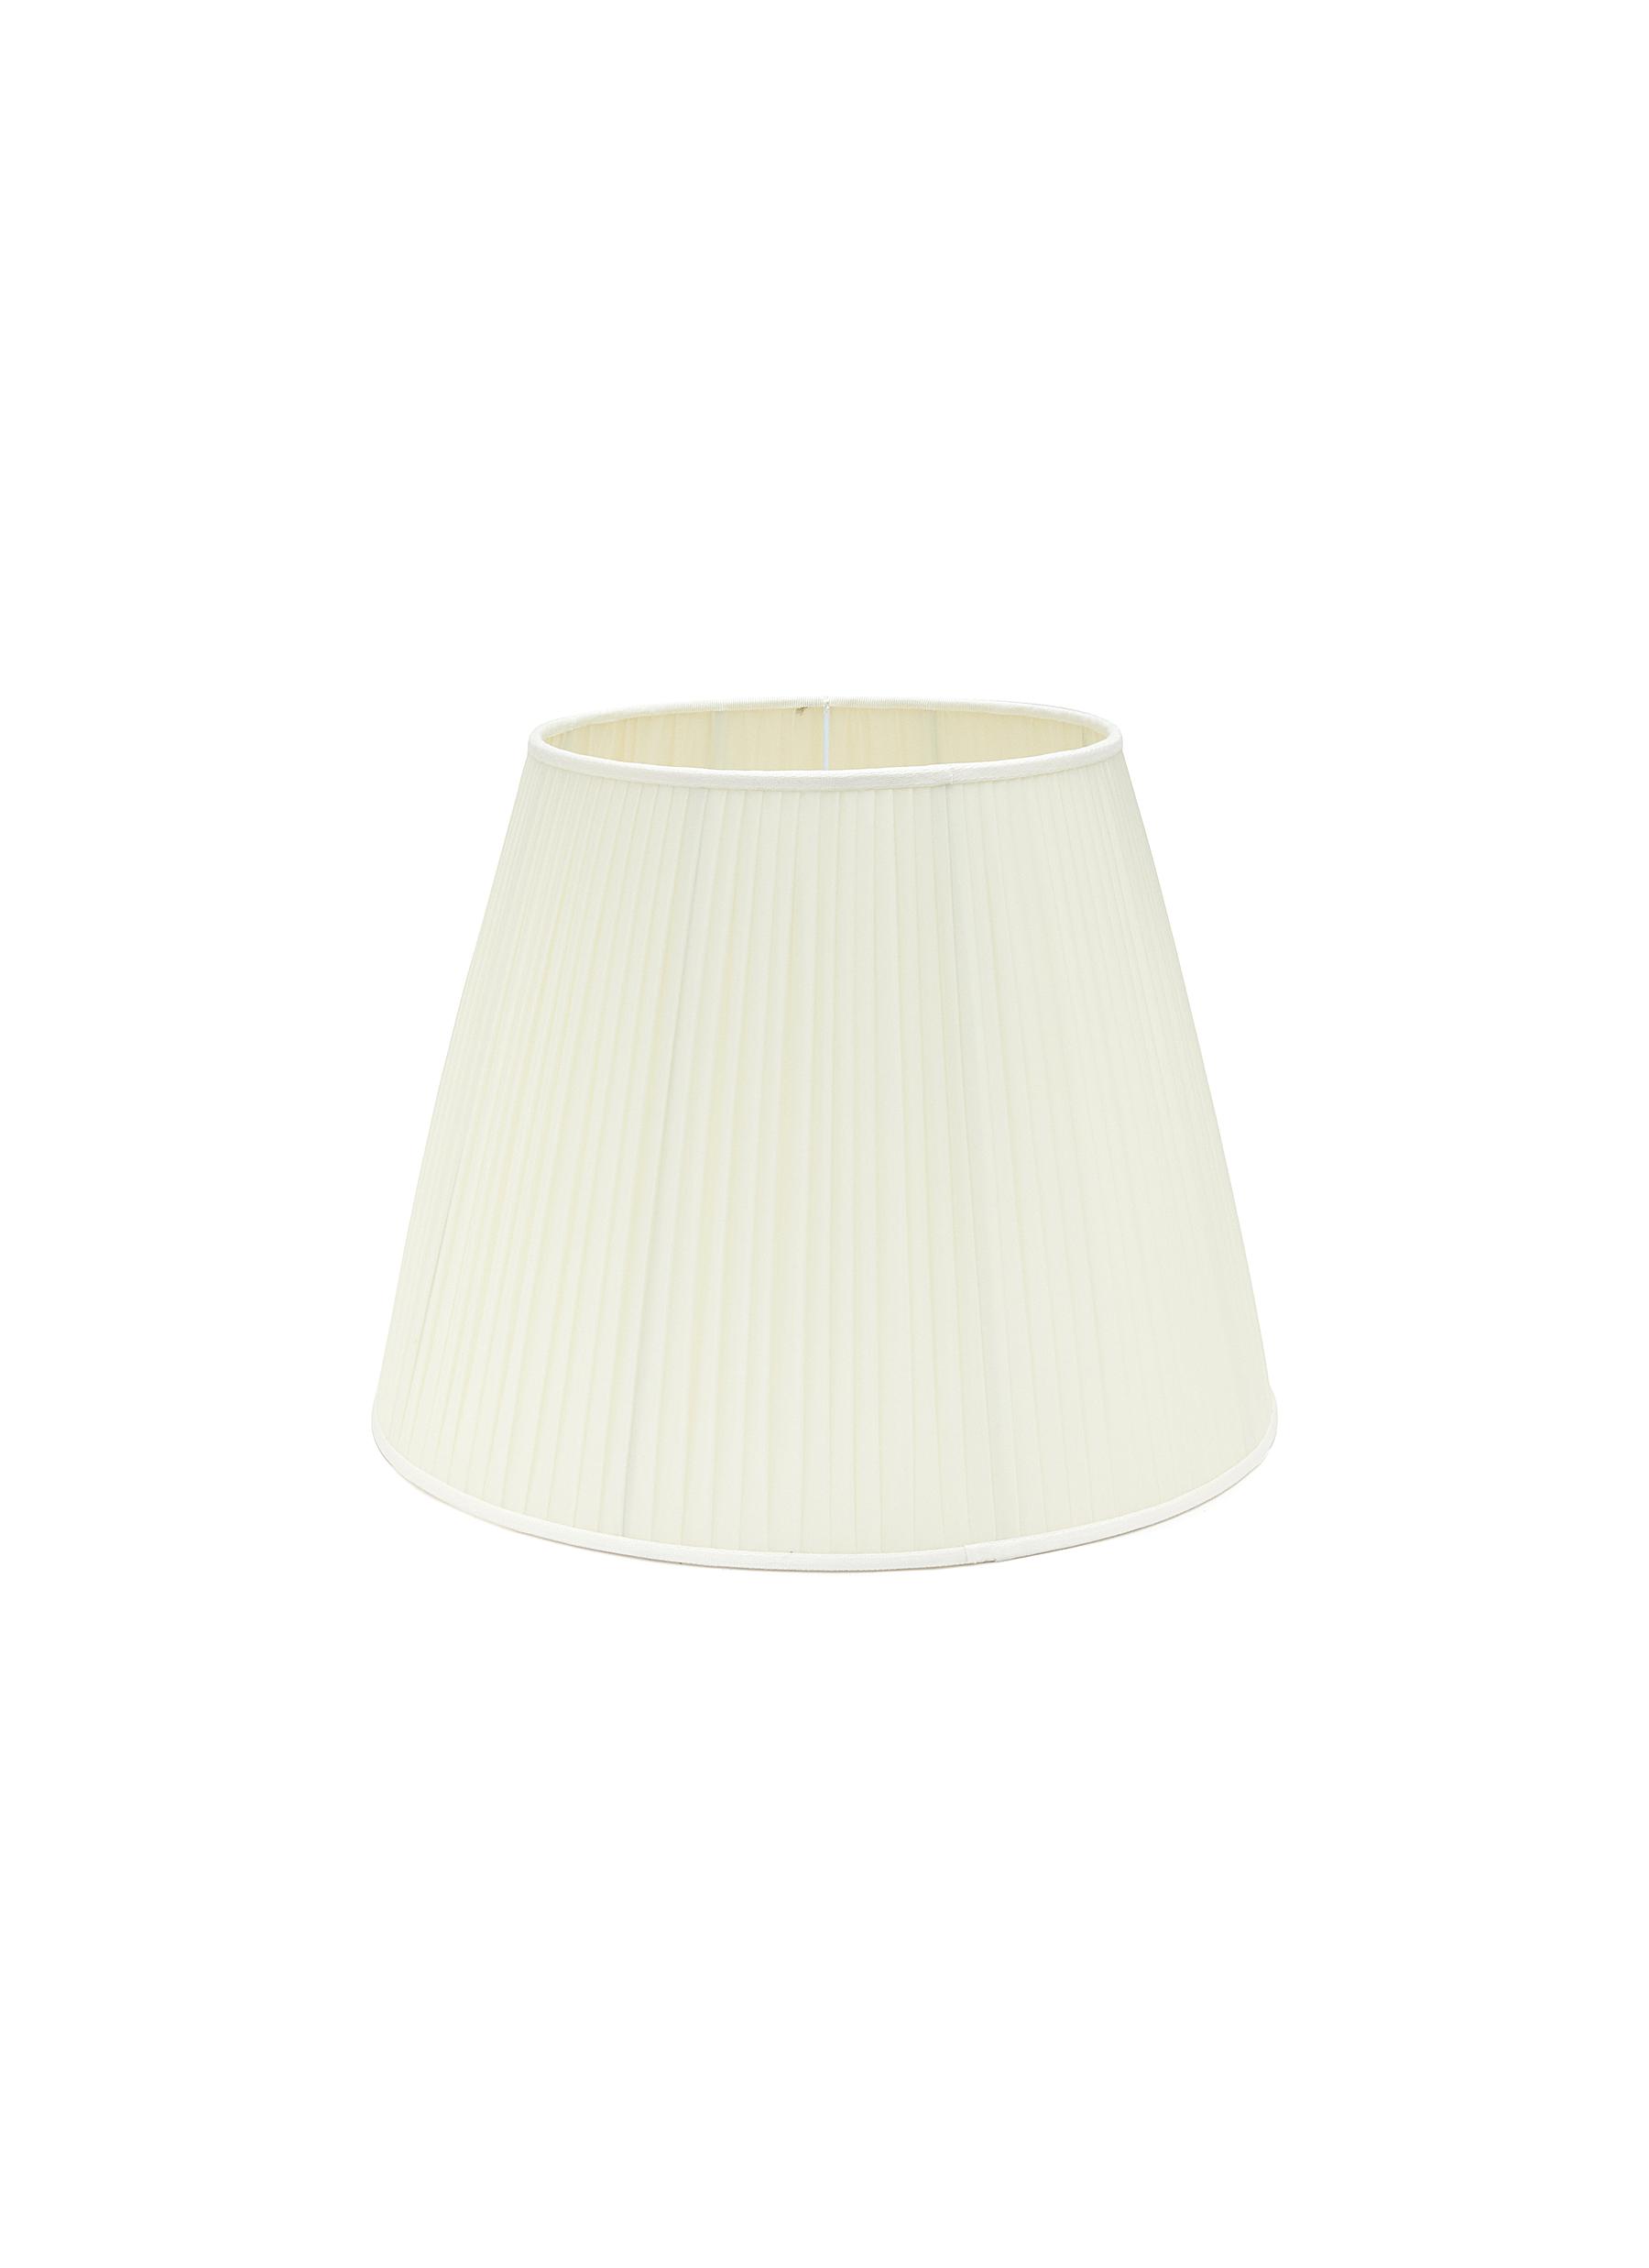 Fornasetti conical cotton lampshade - White